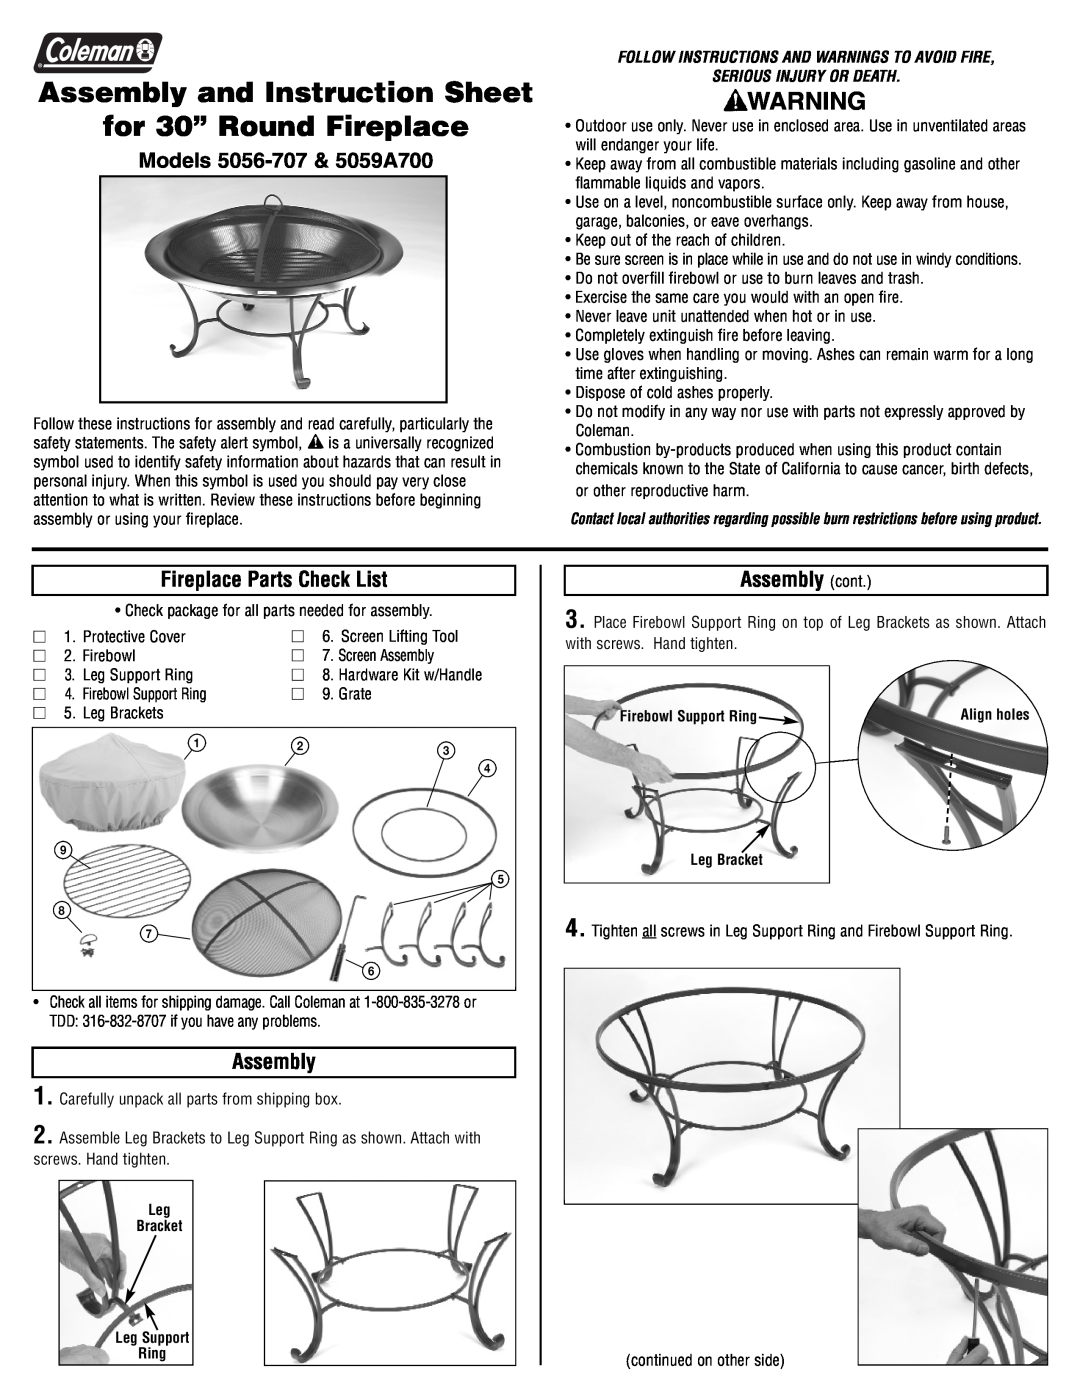 Coleman instruction sheet Models 5056-707& 5059A700, Fireplace Parts Check List, Assembly cont 